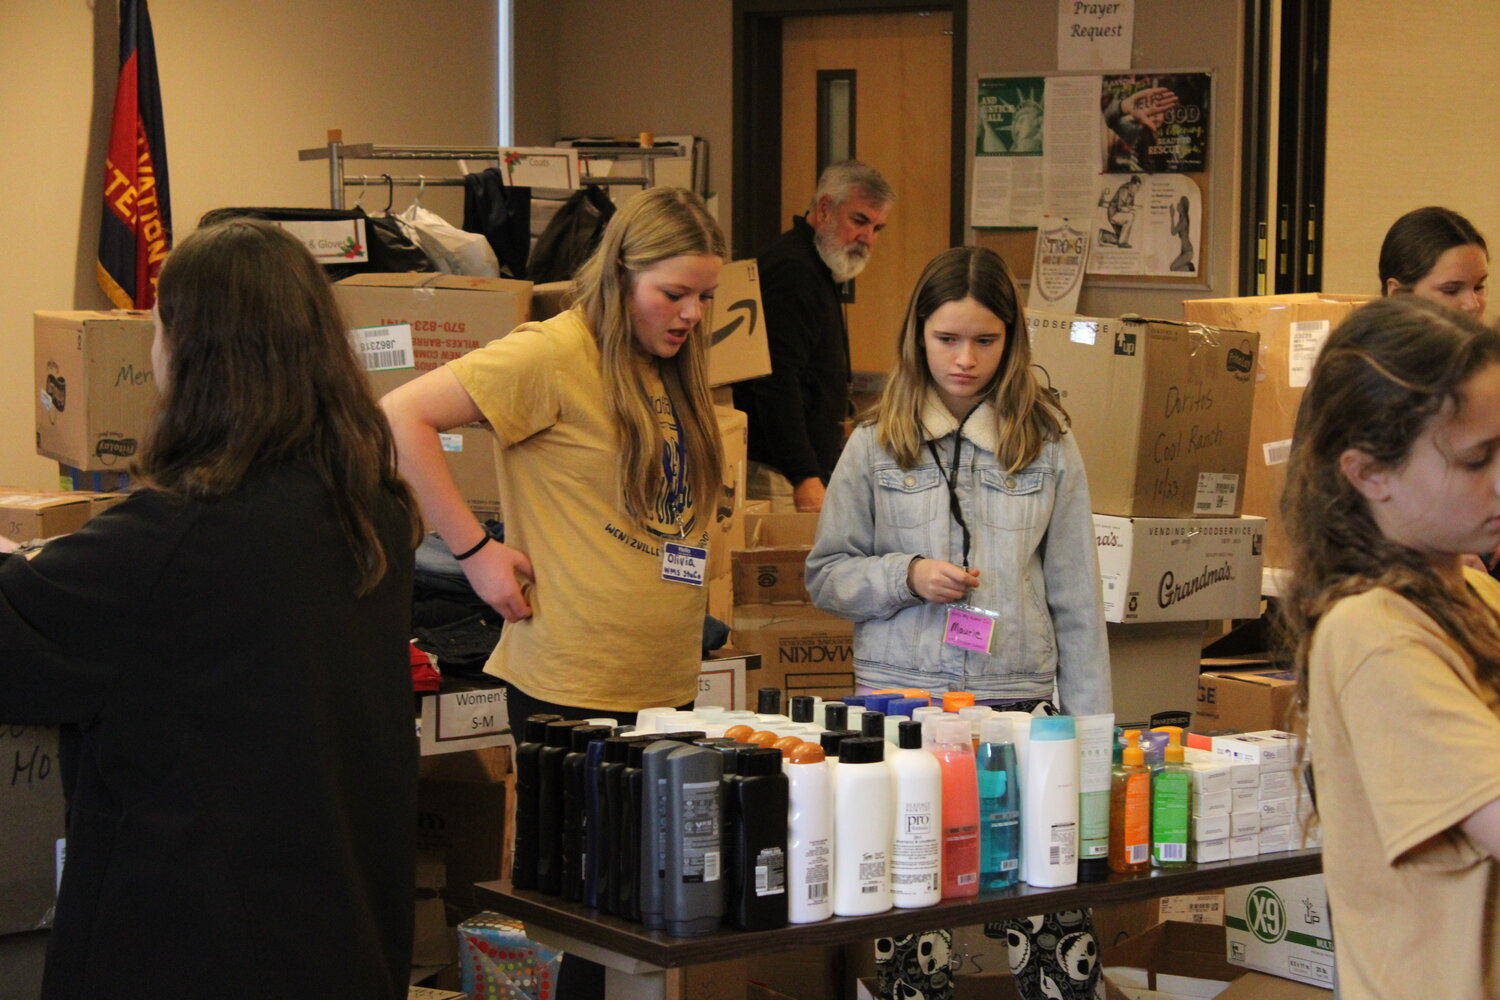 Two Wentzville Middle School students go through the donated toiletry items, helping to set them on a table for homeless individuals to collect.